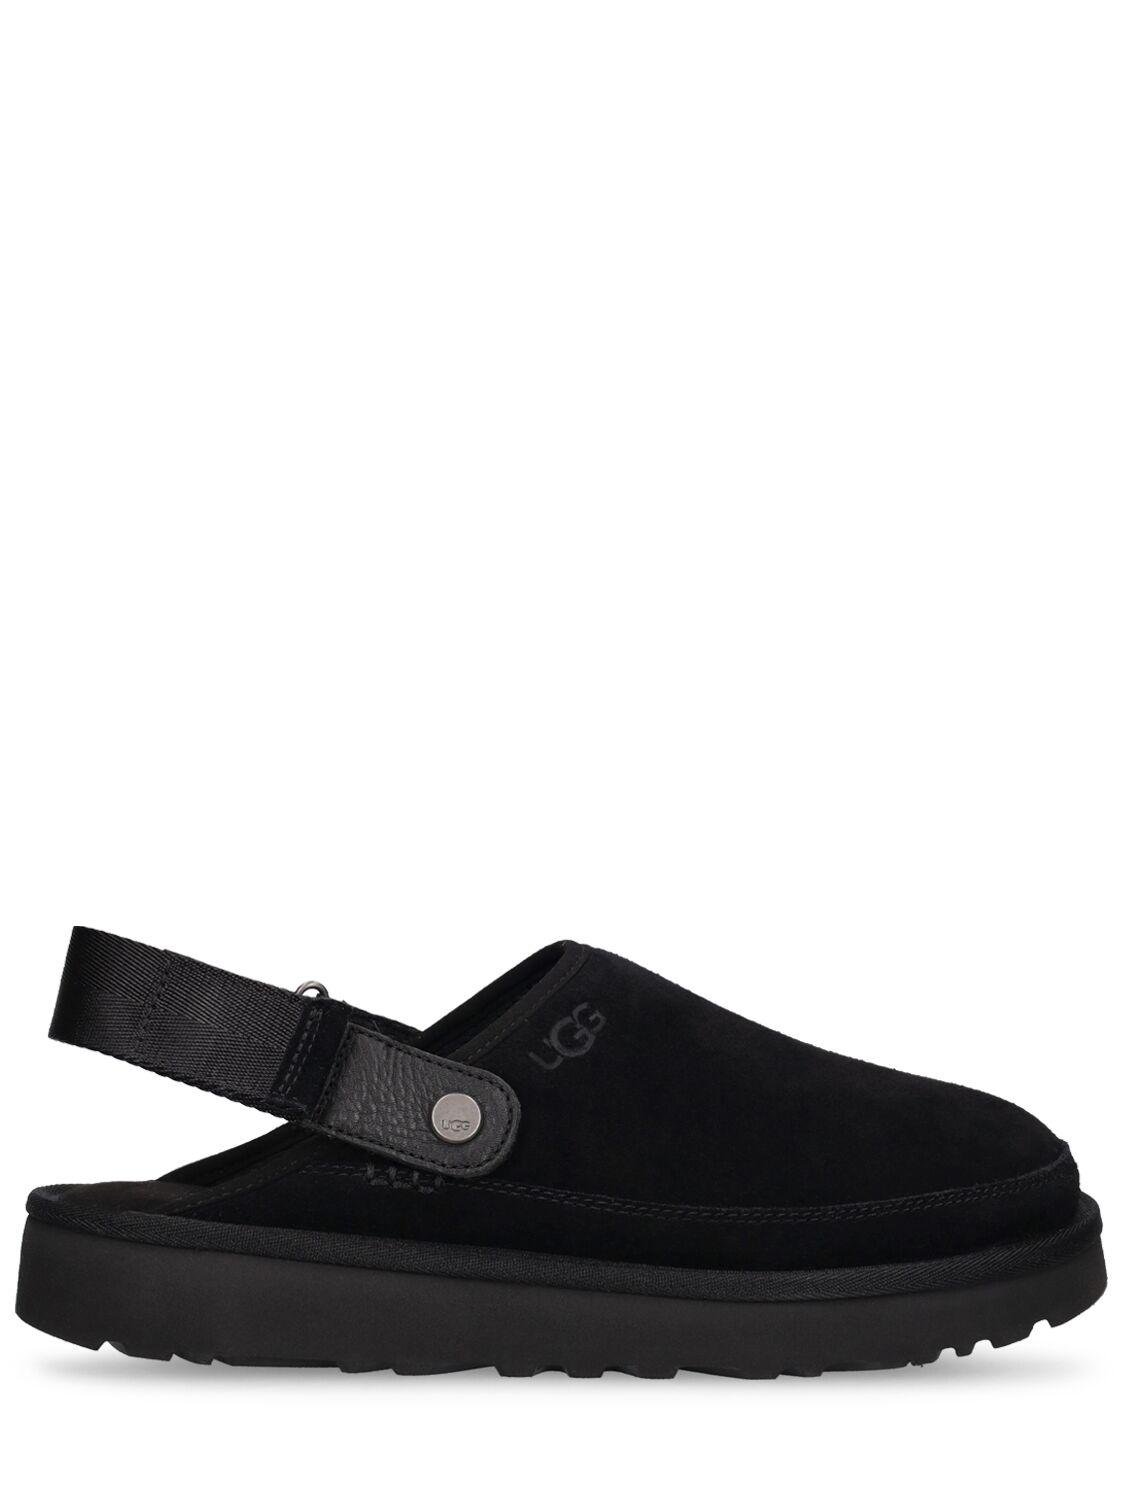 Goldencoast Suede Slip-on Clogs by UGG